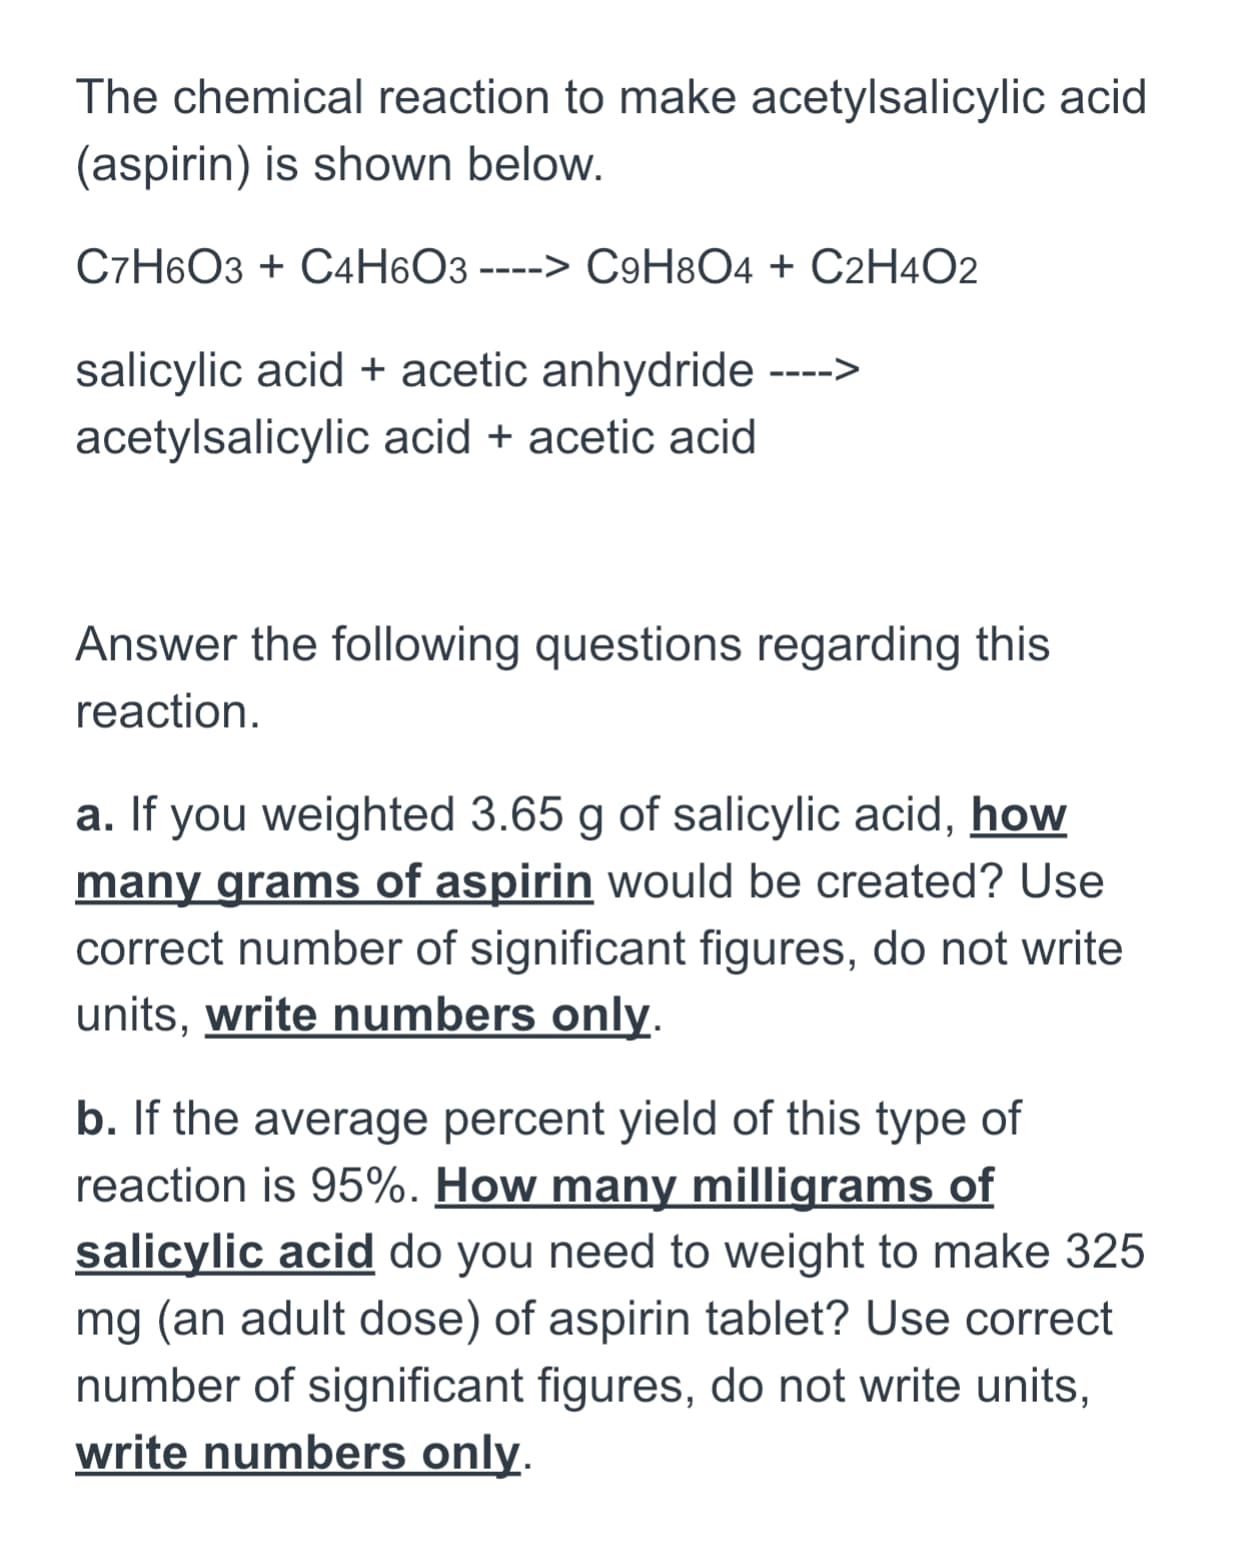 The chemical reaction to make acetylsalicylic acid
(aspirin) is shown below.
C7H6O3 + C4H6O3 ----> C9H8O4 + C2H4O2
salicylic acid + acetic anhydride ---->
acetylsalicylic acid + acetic acid
Answer the following questions regarding this
reaction.
a. If you weighted 3.65 g of salicylic acid, how
many grams of aspirin would be created? Use
correct number of significant figures, do not write
units, write numbers only.
b. If the average percent yield of this type of
reaction is 95%. How many milligrams of
salicylic acid do you need to weight to make 325
mg (an adult dose) of aspirin tablet? Use correct
number of significant figures, do not write units,
write numbers only.
